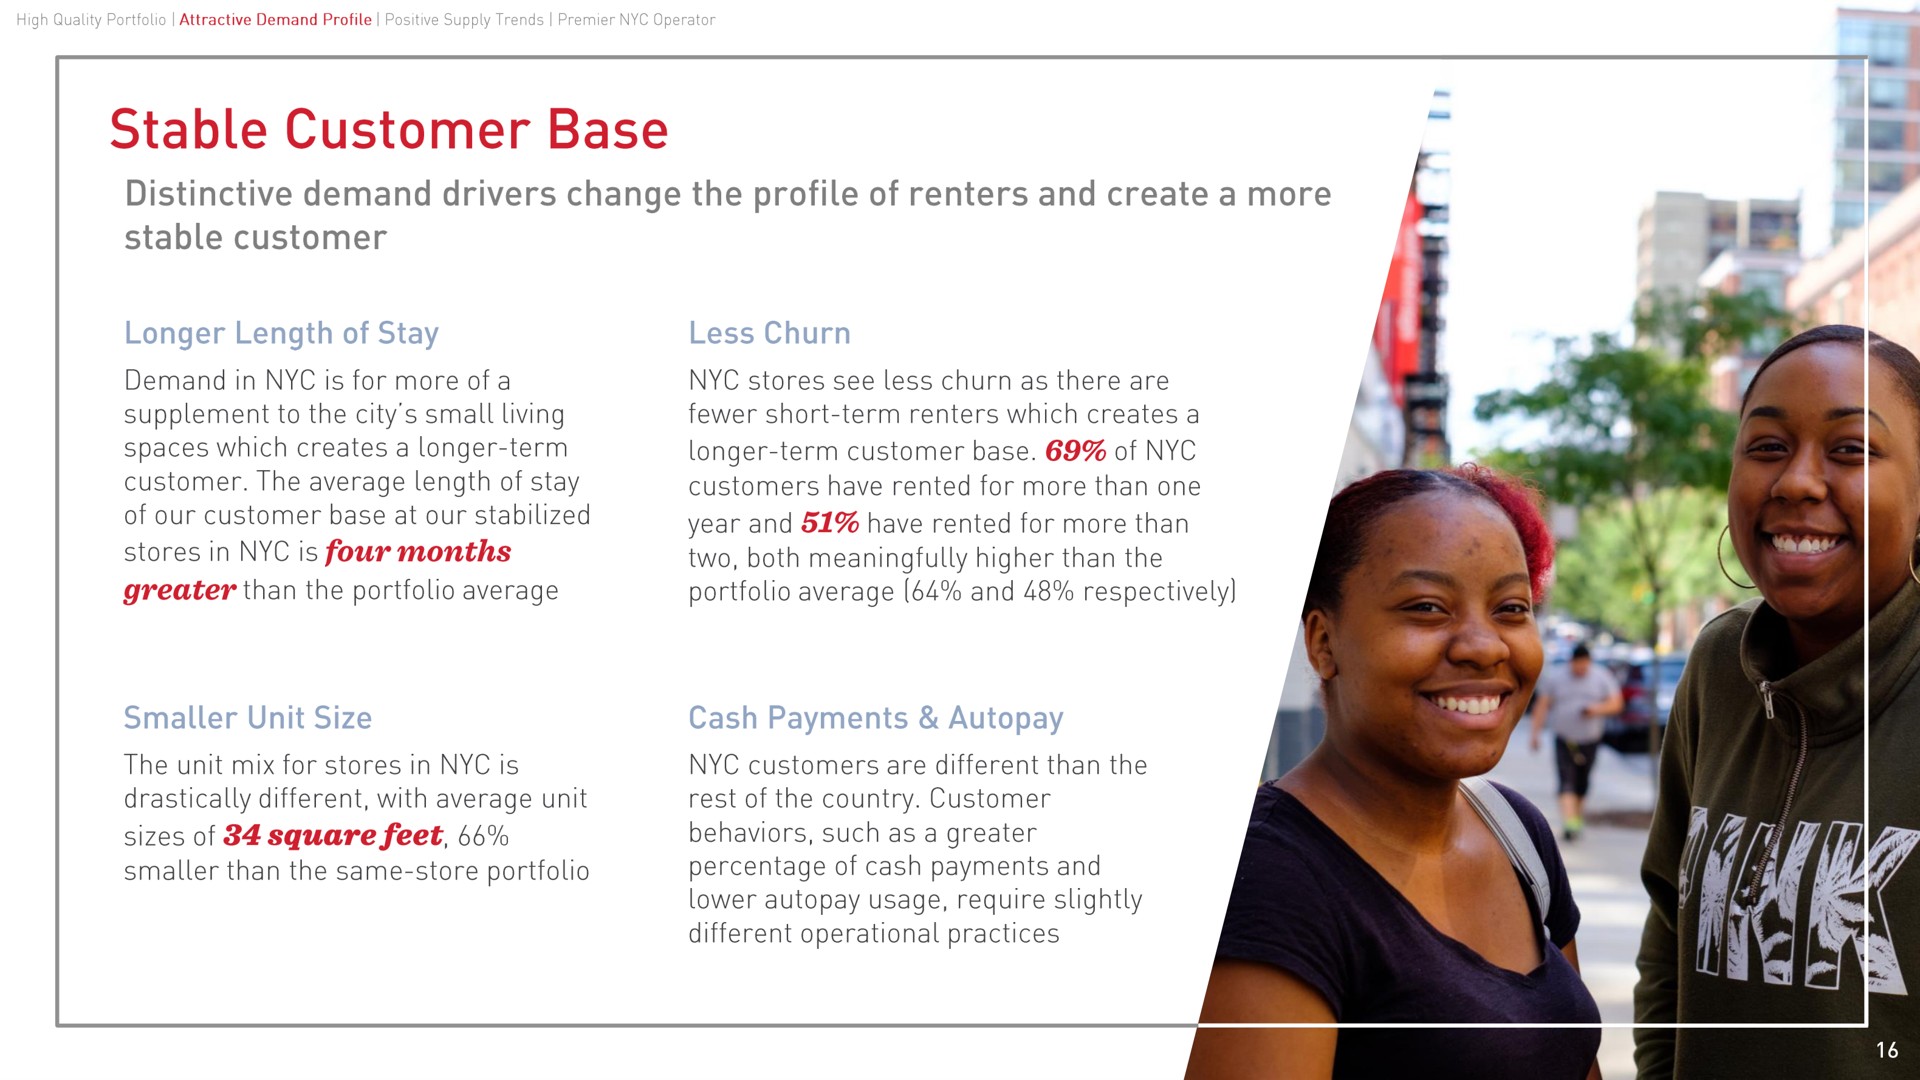 stable customer base distinctive demand drivers change the profile of renters and create a more stable customer a demand in for more of a supplement to the city small living spaces which creates a longer term customer the average length of stay of our customer base at our stabilized stores in is four months greater than the portfolio average stores see less churn as there are short term renters which creates a longer term customer base of customers have rented for more than one year and have rented for more than two both meaningfully higher than the portfolio average and respectively the unit mix for stores in is sizes of square feet smaller than the same store portfolio customers are different than the behaviors such as a greater percentage of cash payments and different operational practices | CubeSmart